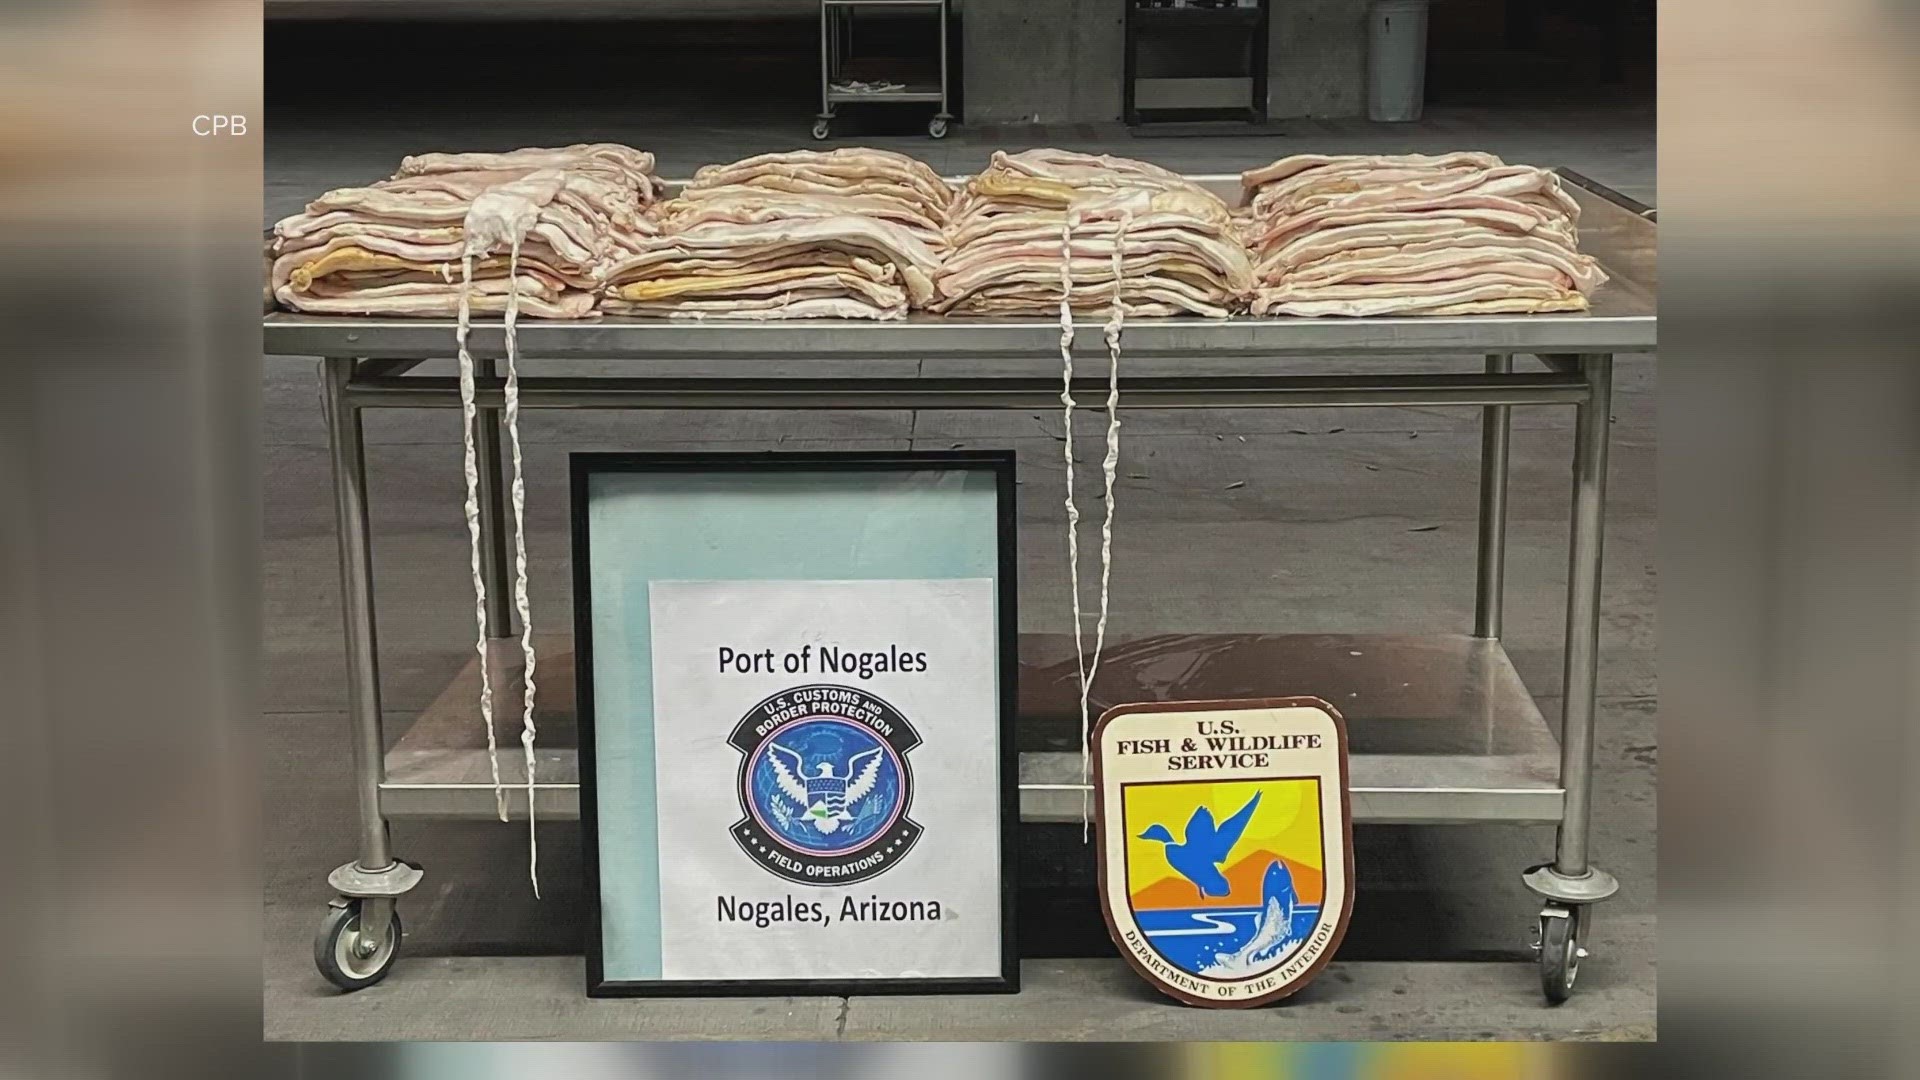 CBP officials said the 270 swim bladders seized in Nogales is the largest seizure of this kind in Arizona.